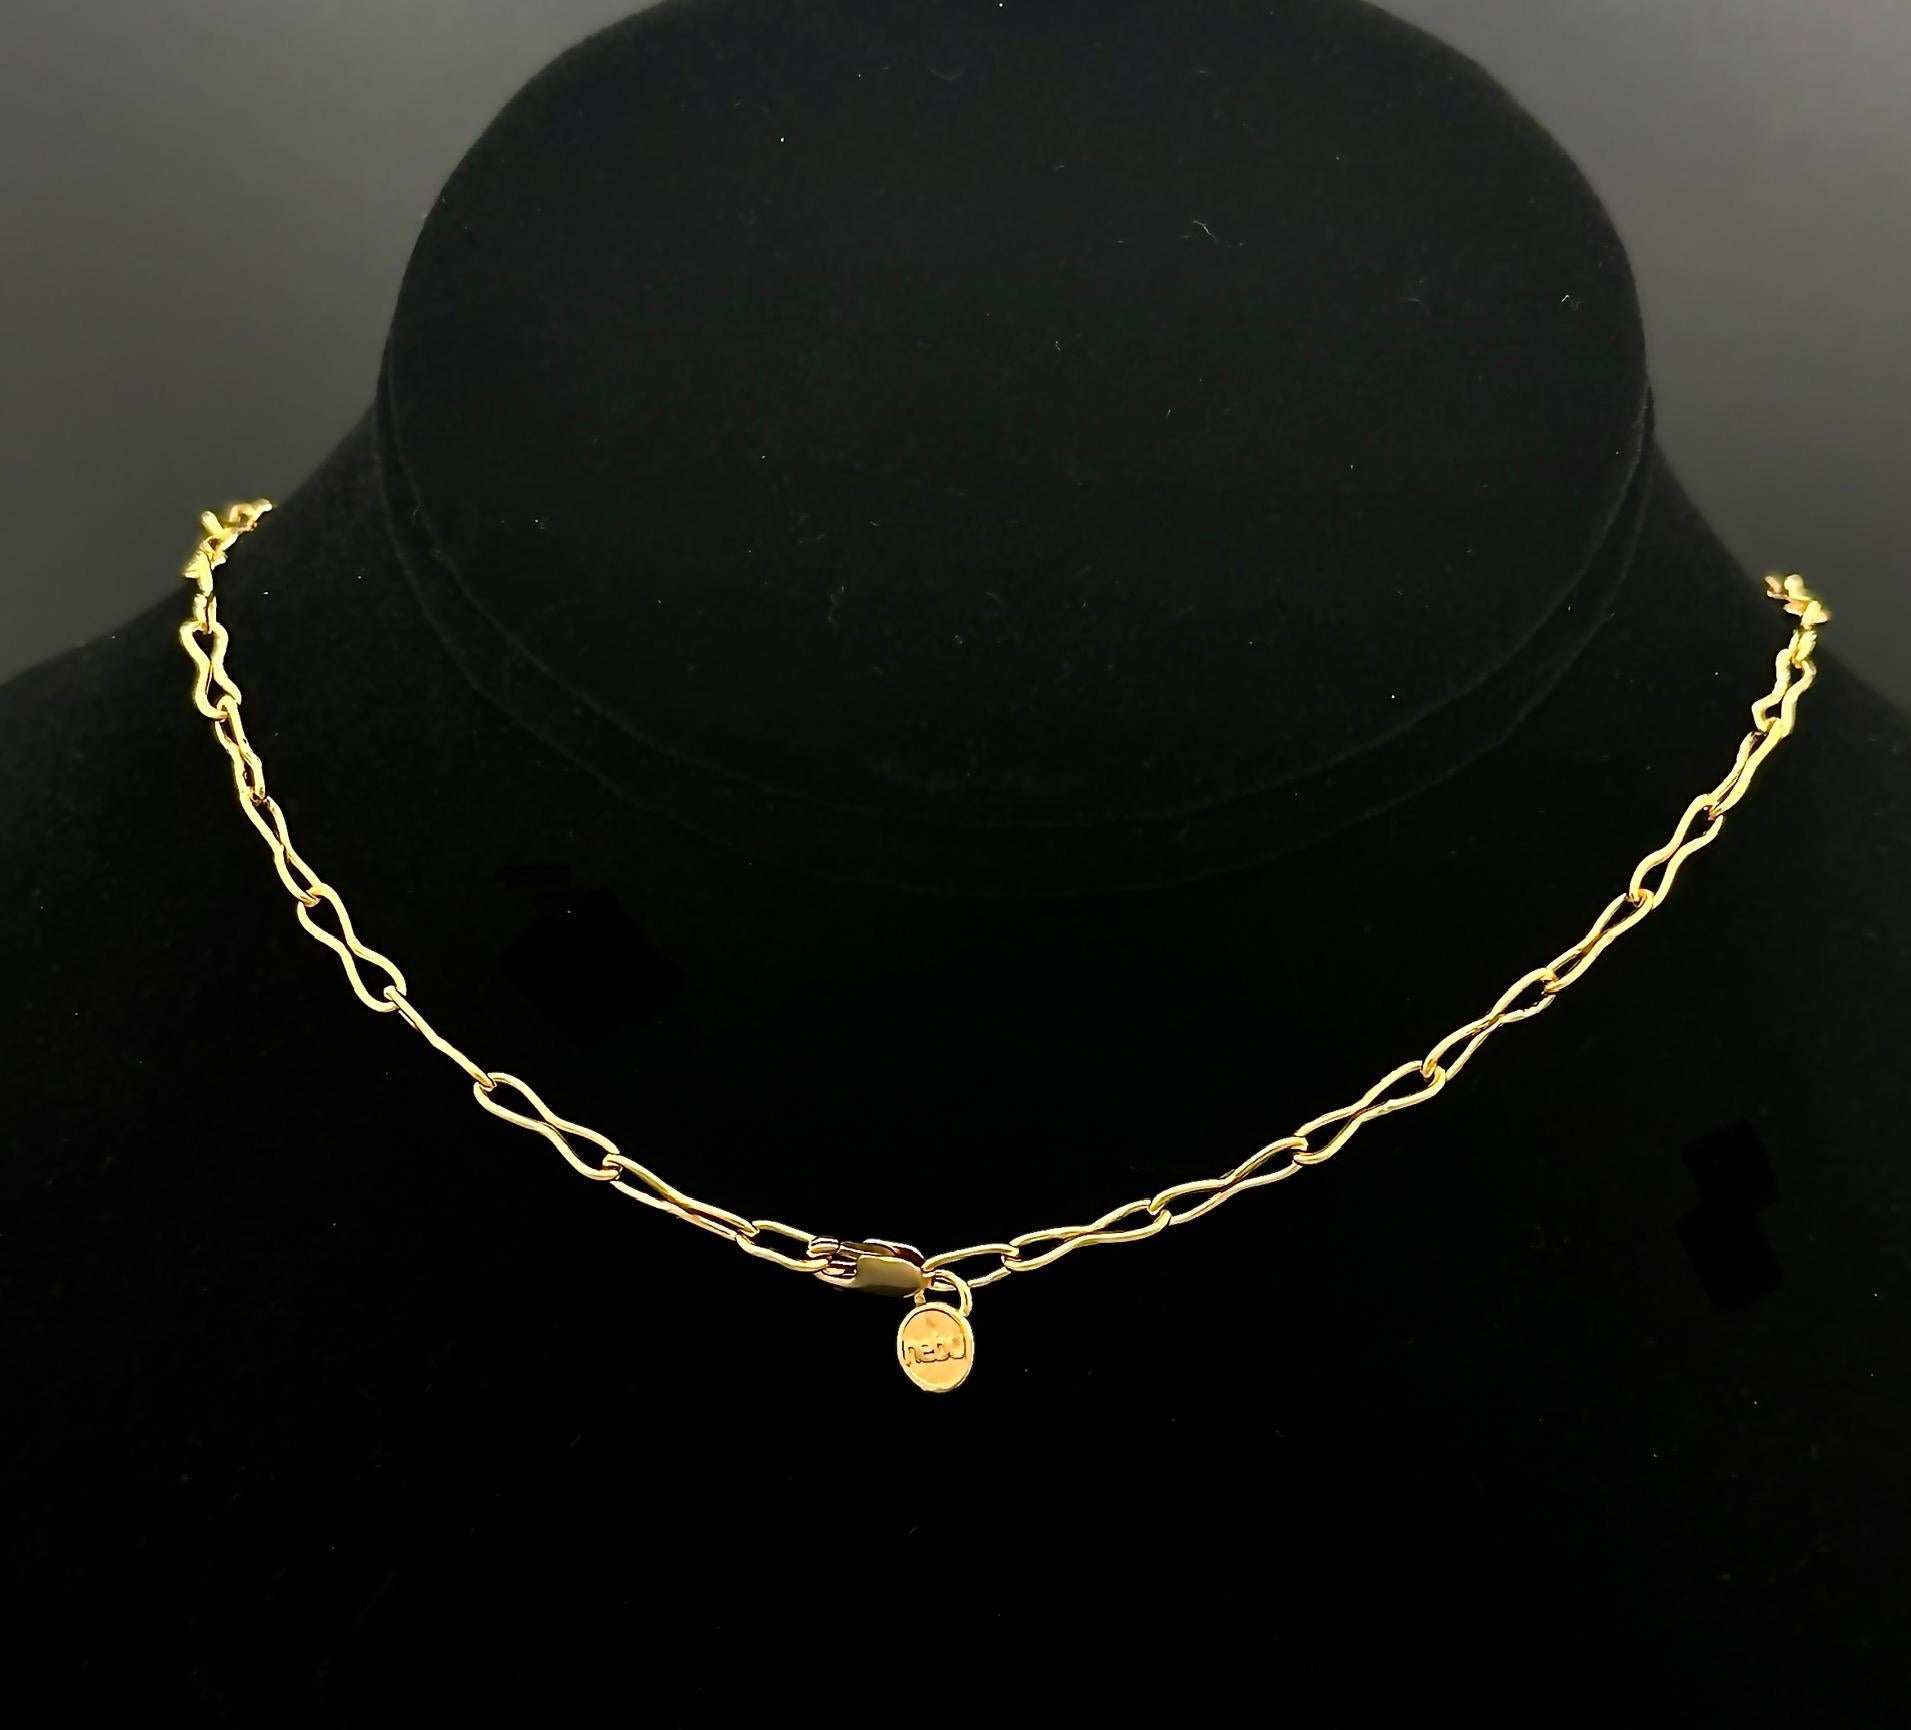 -Made to order (in 2-3 weeks)
-18K gold
-Handmade
-Stamped with Nebu logo
-Lobster clasp
-18 inch (can be made to order at a different length)


Introducing our exquisite 18K gold necklace, a masterpiece of handmade craftsmanship. Each link is